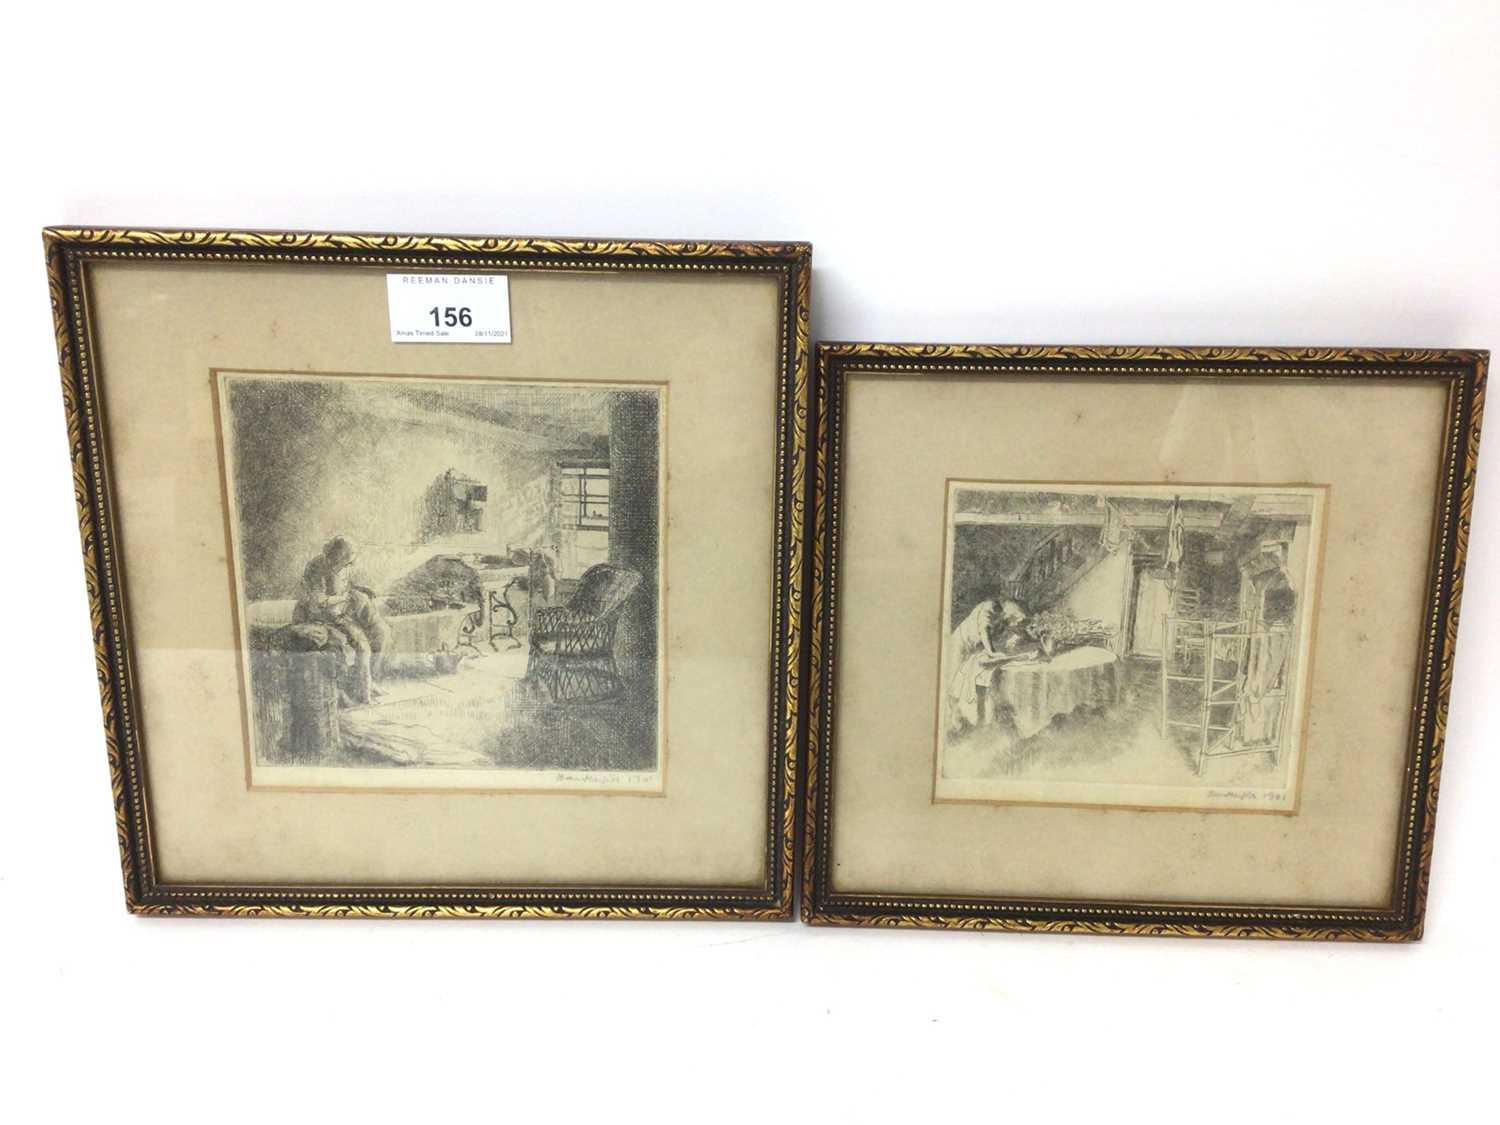 Lot 156 - Jean Harper (1921-2005) pair of signed etchings - interiors, signed and dated 1941, 15cm square and 12cm x 13cm, in glazed frames